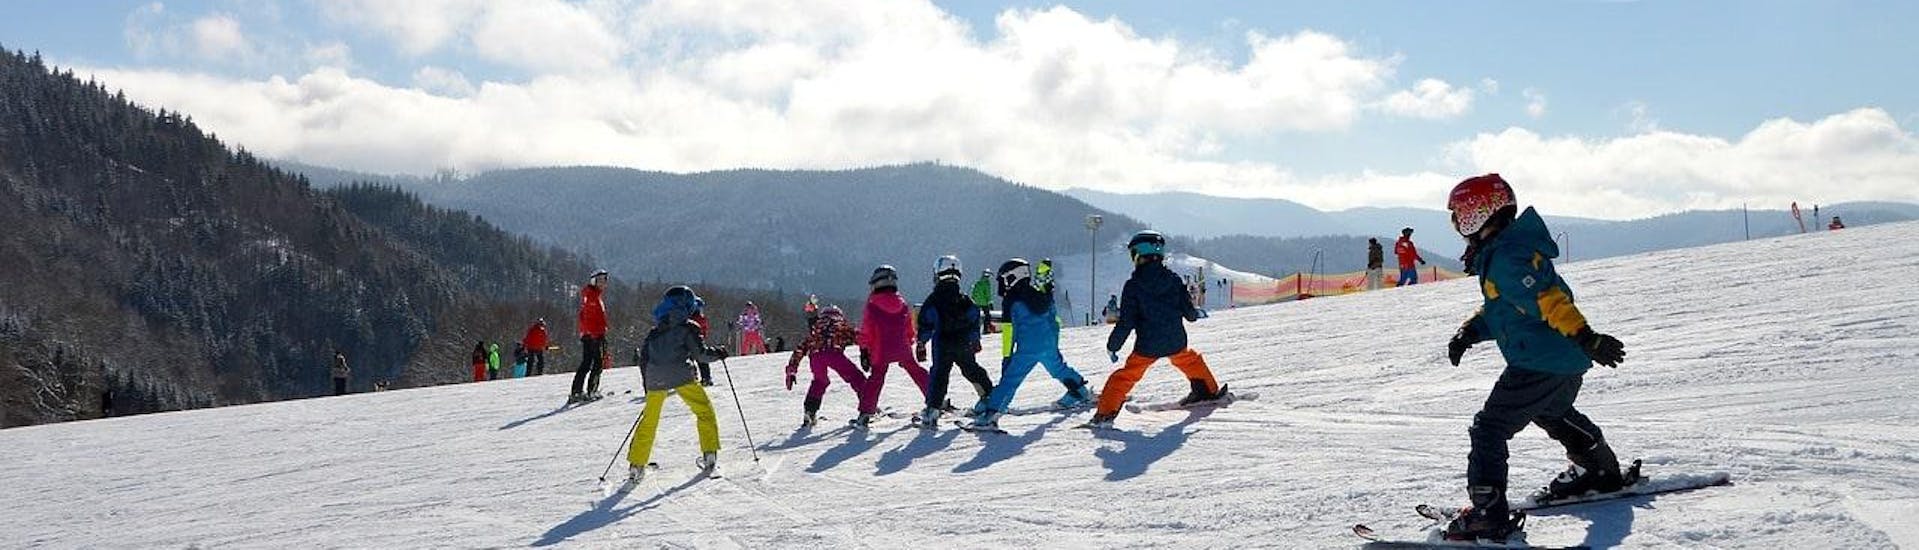 Kids are skiing down a slope during their Kids Ski Lessons (5-11 years) - Max 5 with the ski school Moonshot La Bresse.